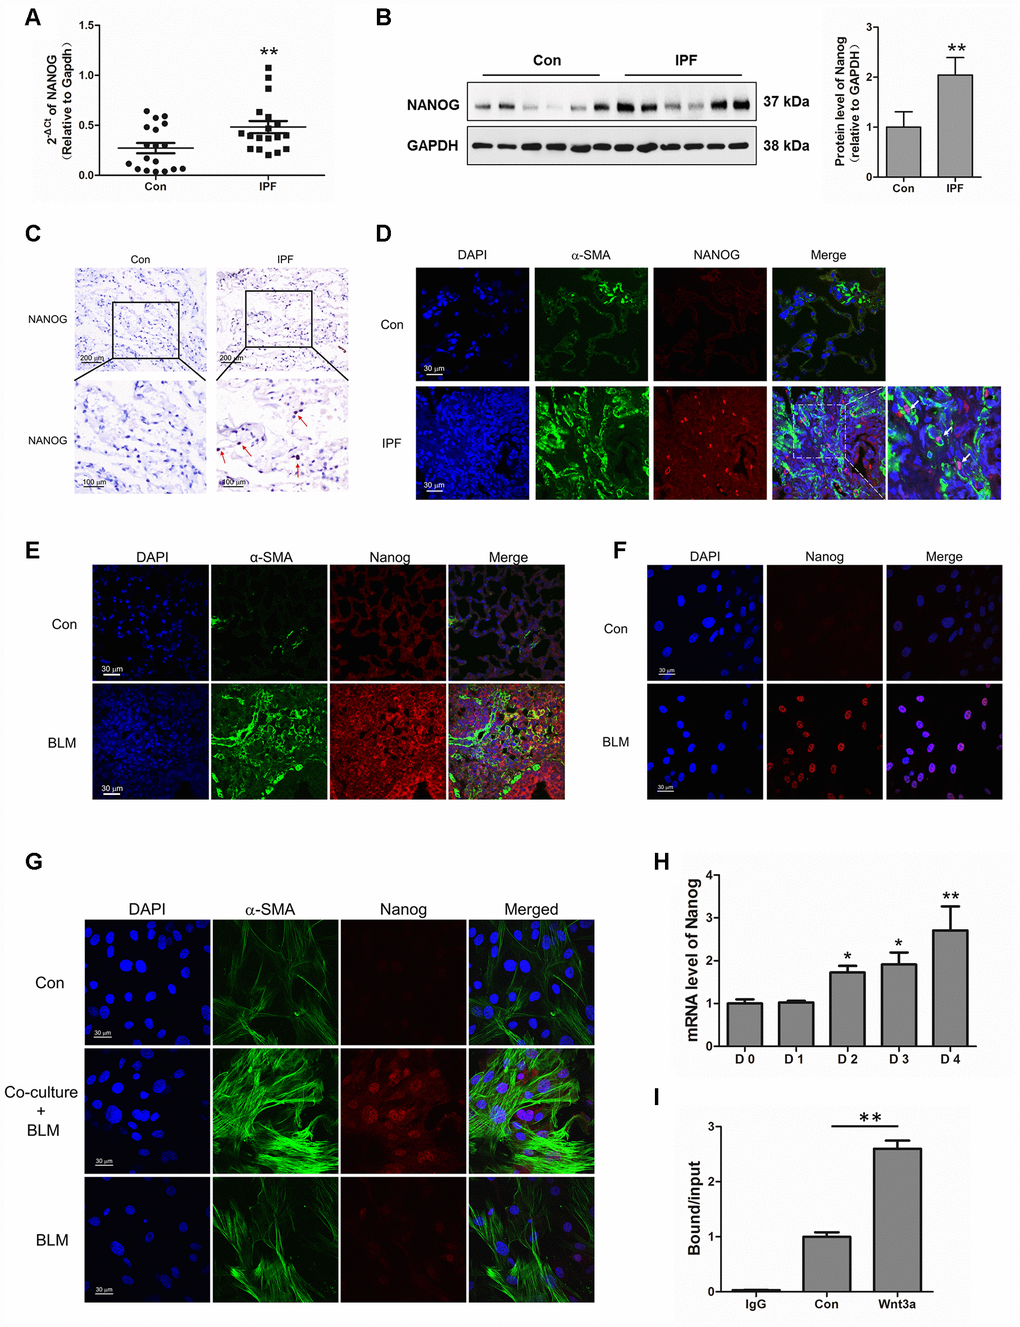 Aberrantly expressed Nanog in activated pulmonary fibroblasts and fibrotic lung tissues were mediated by Wnt/β-catenin. (A–C) The expression of Nanog in lung tissues derived from patients with idiopathic pulmonary fibrosis (IPF) was determined by Q-PCR (A), Western blot (B) and immunohistochemical analysis (C), ** P D) The lung tissues of patients with IPF were double stained with α-SMA and Nanog by immunofluorescence. (E) The lung tissues derived from pulmonary fibrosis mouse models were double stained with α-SMA and Nanog via immunofluorescence. (F) The expression of Nanog in pulmonary fibroblasts isolated from fibrotic mouse lung tissues were measured by immunofluorescence. (G) Cells were treated as in Figure 3D. Pulmonary fibroblasts were double stained with α-SMA and Nanog by immunofluorescence. (H, I) Pulmonary fibroblasts were treated with Wnt3a for various durations. (H) The mRNA level of Nanog was detected by Q-PCR, * P I) ChIP assays were performed by using chromatin isolated from Wnt3a treated pulmonary fibroblasts. The final DNA extracts were analysed by Q-PCR, ** P 